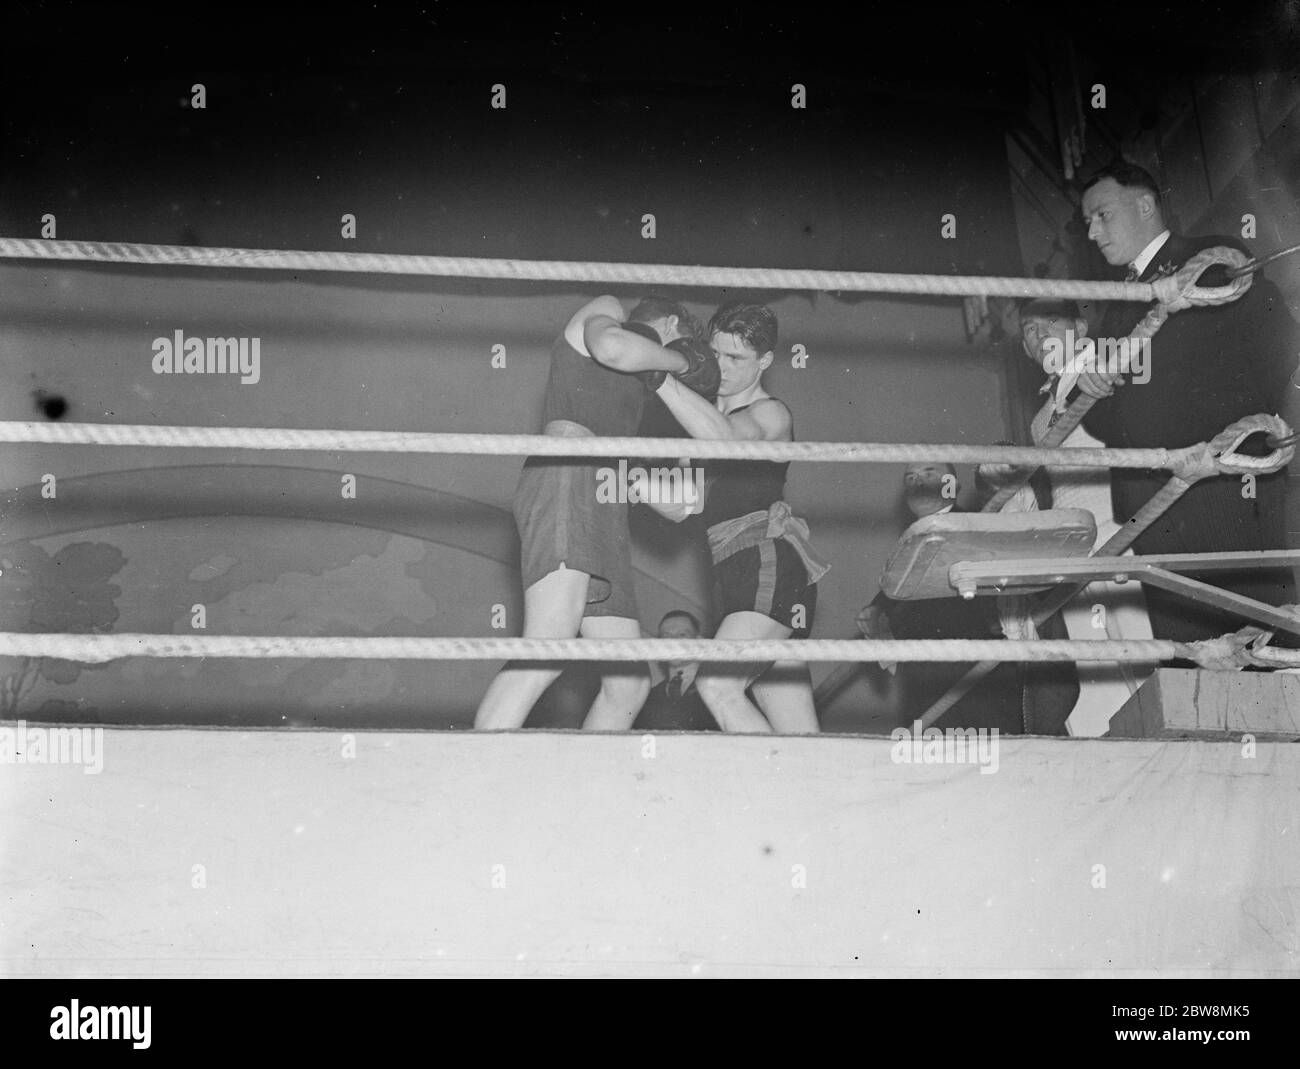 Boxing club contest between Eltham boxing club and Battersea boxing club . Blake and Williams compete in the ring . 1936 Stock Photo